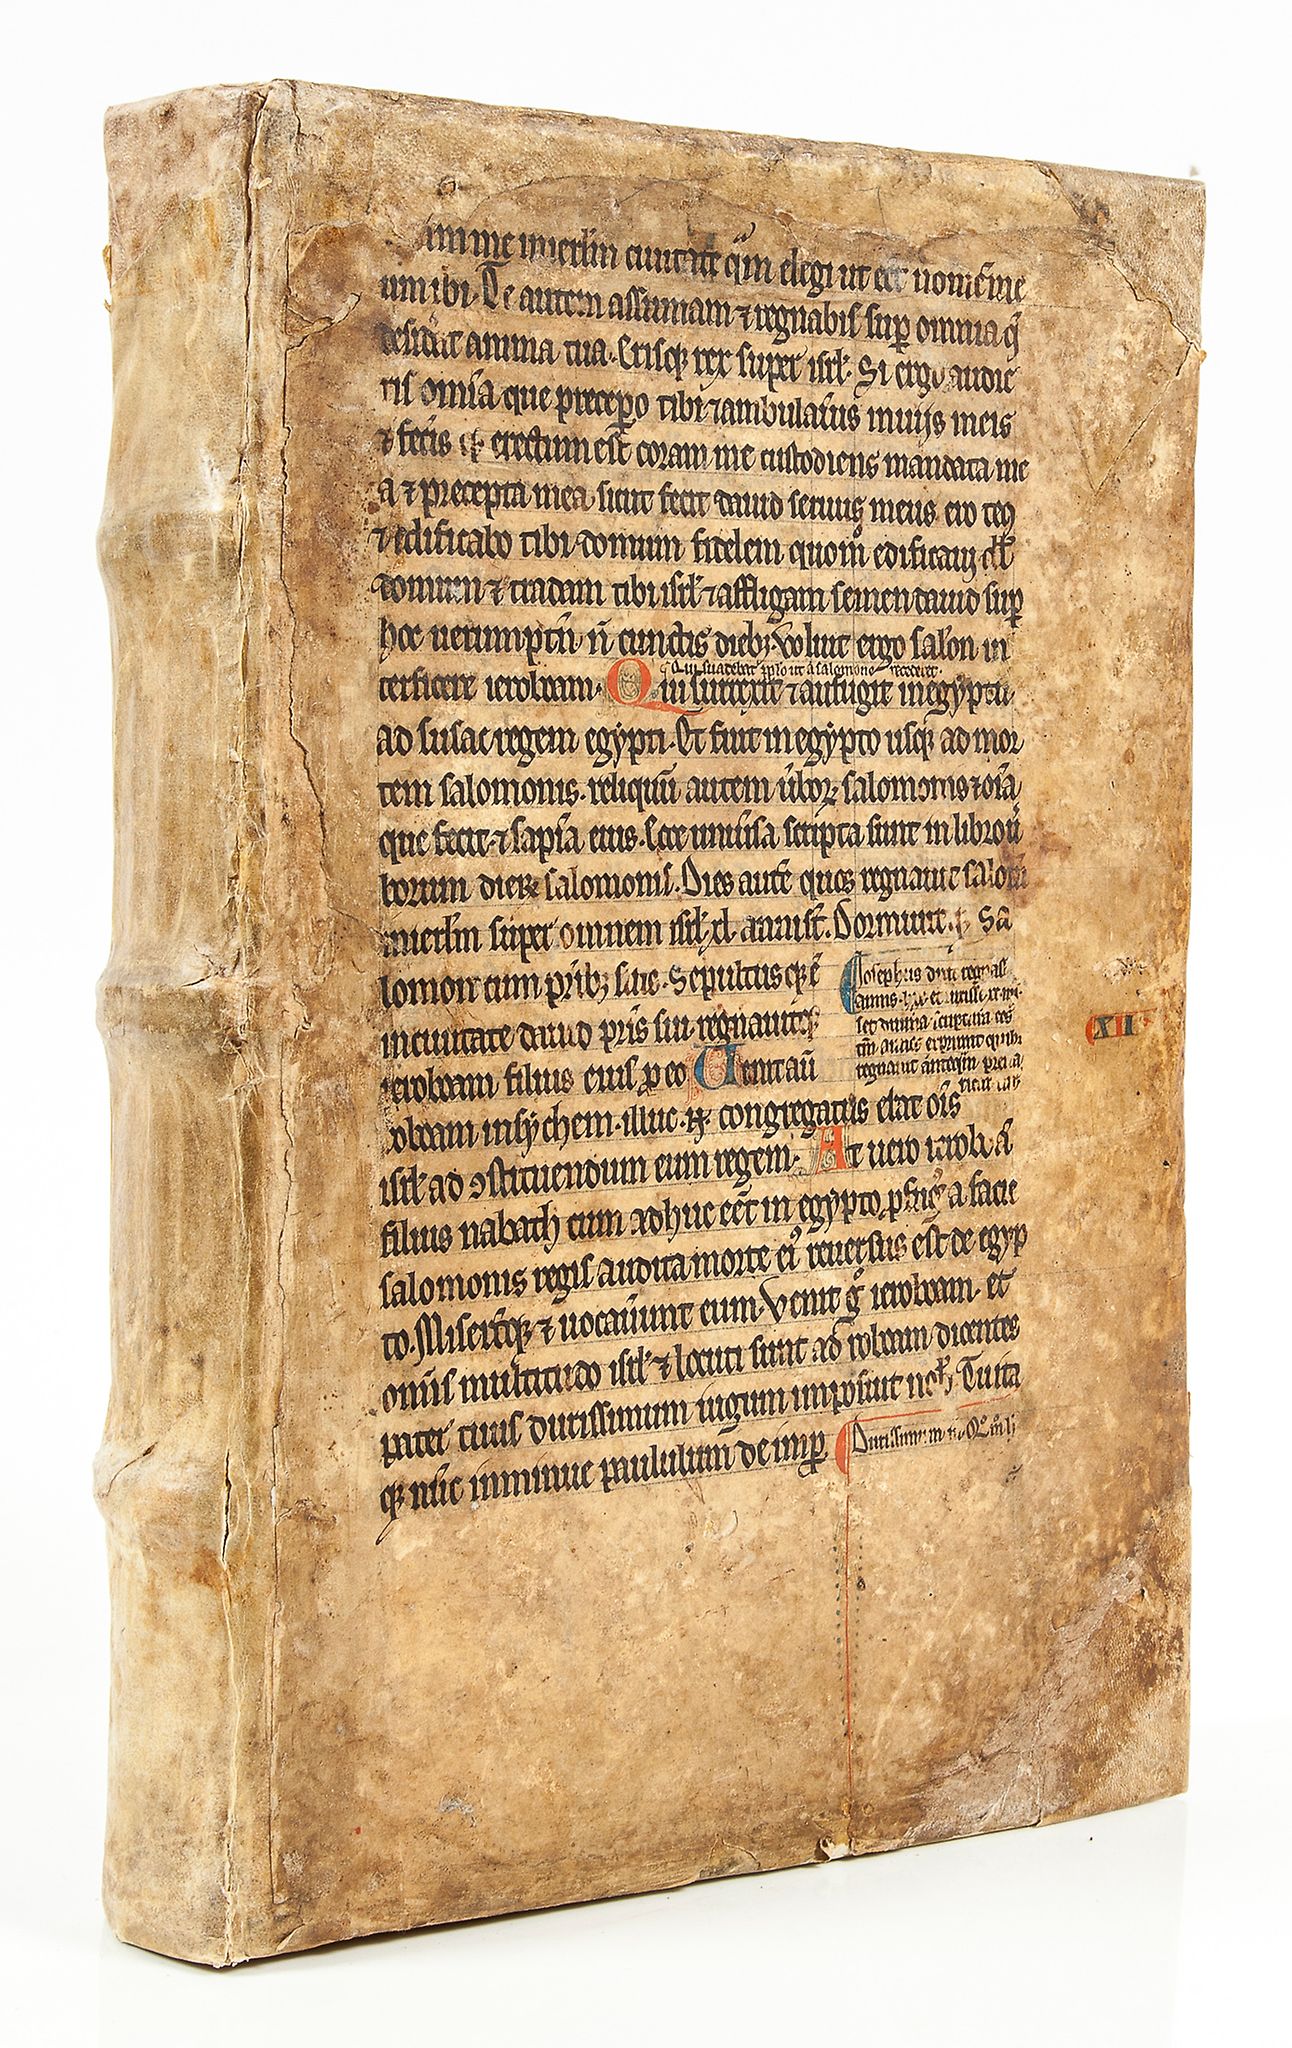 Two leaves from a Romanesque Glossed Bible, - in Latin on parchment, on the front and back boards of